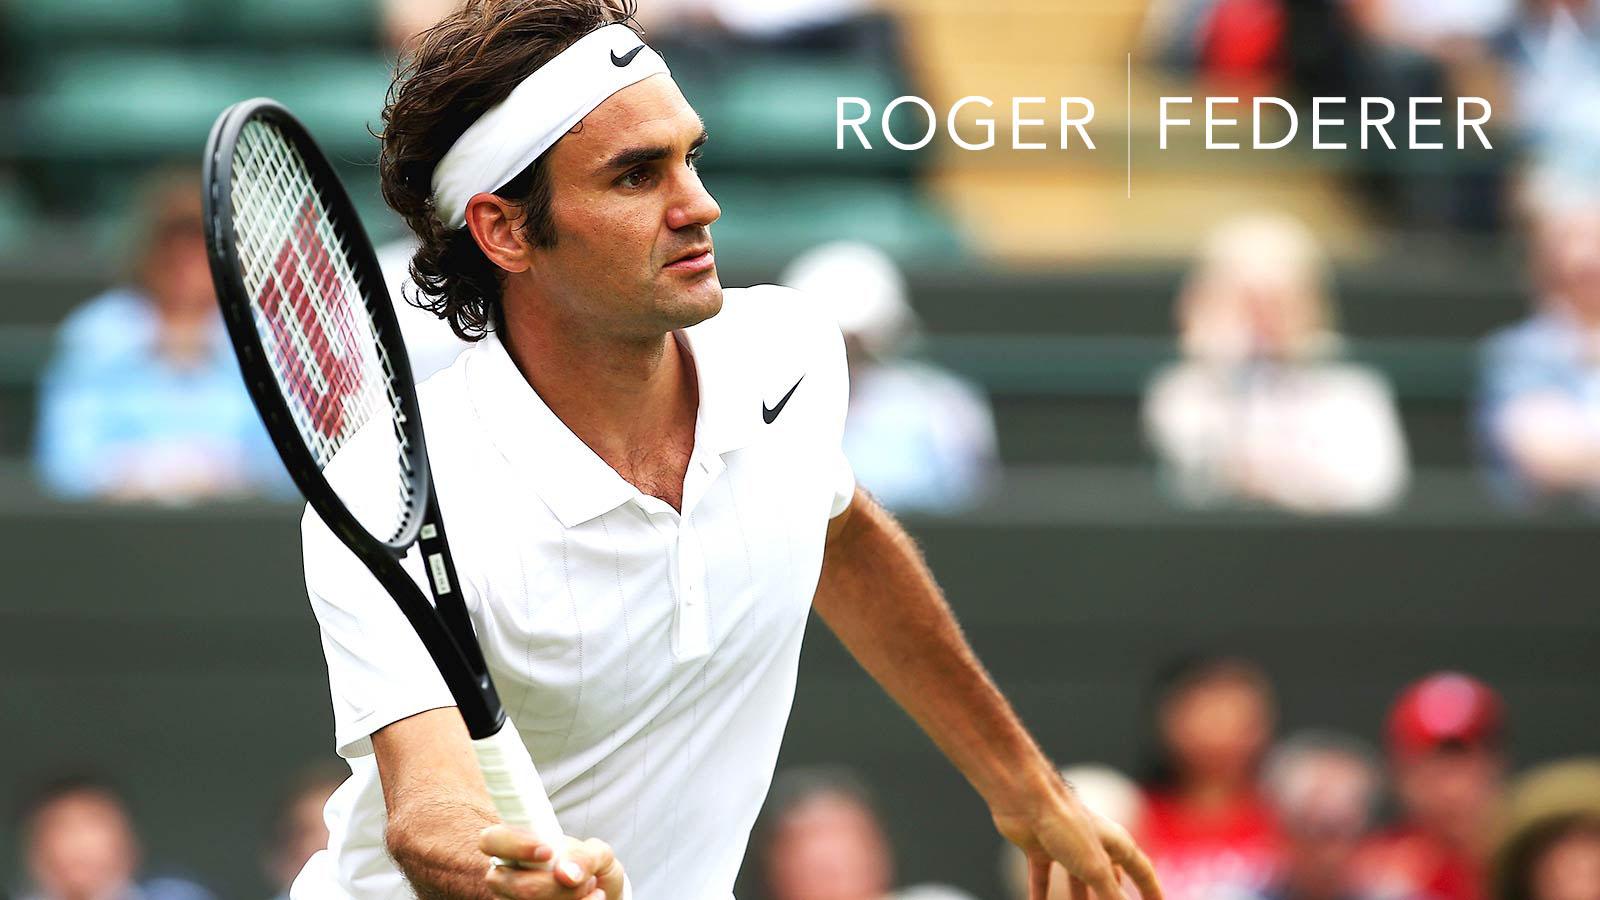 Federer Wallpaper HD, image collections of wallpaper